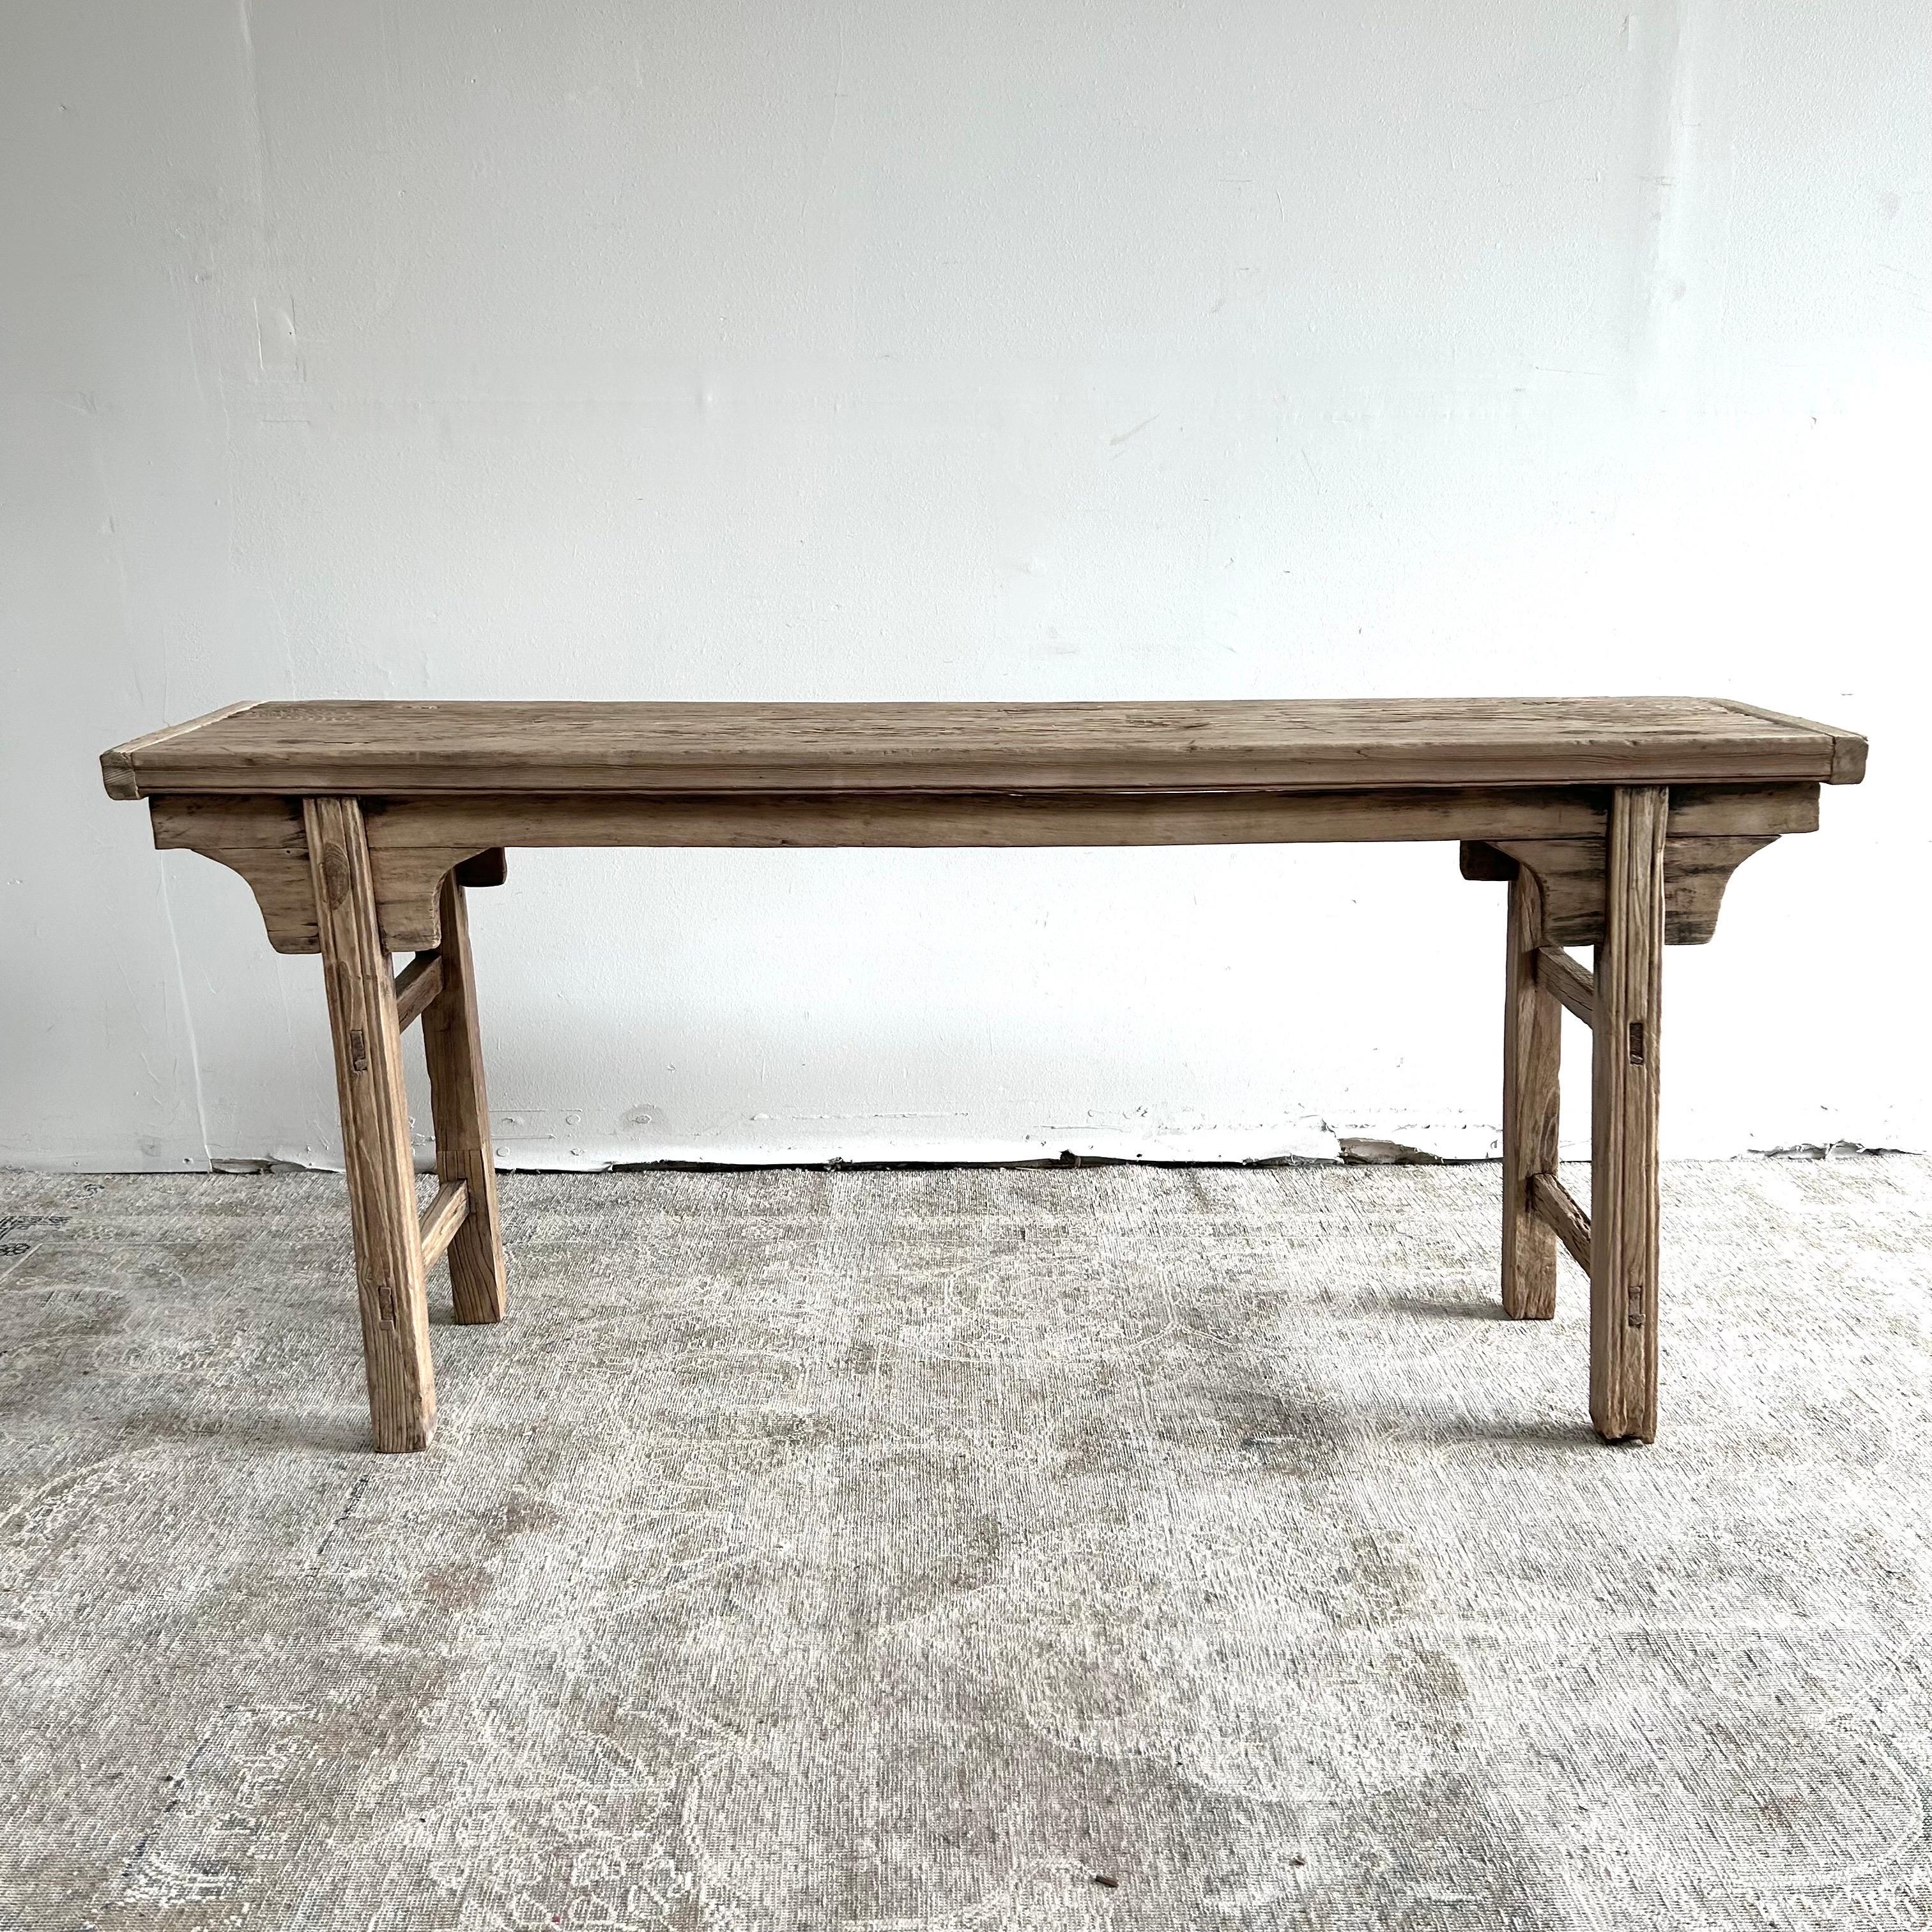 Vintage antique elm wood console table beautiful antique patina, with weathering and age, these are solid and sturdy ready for daily use, use as a entry table, sofa table or console in a dining room. Great in a living room with baskets or ottomans